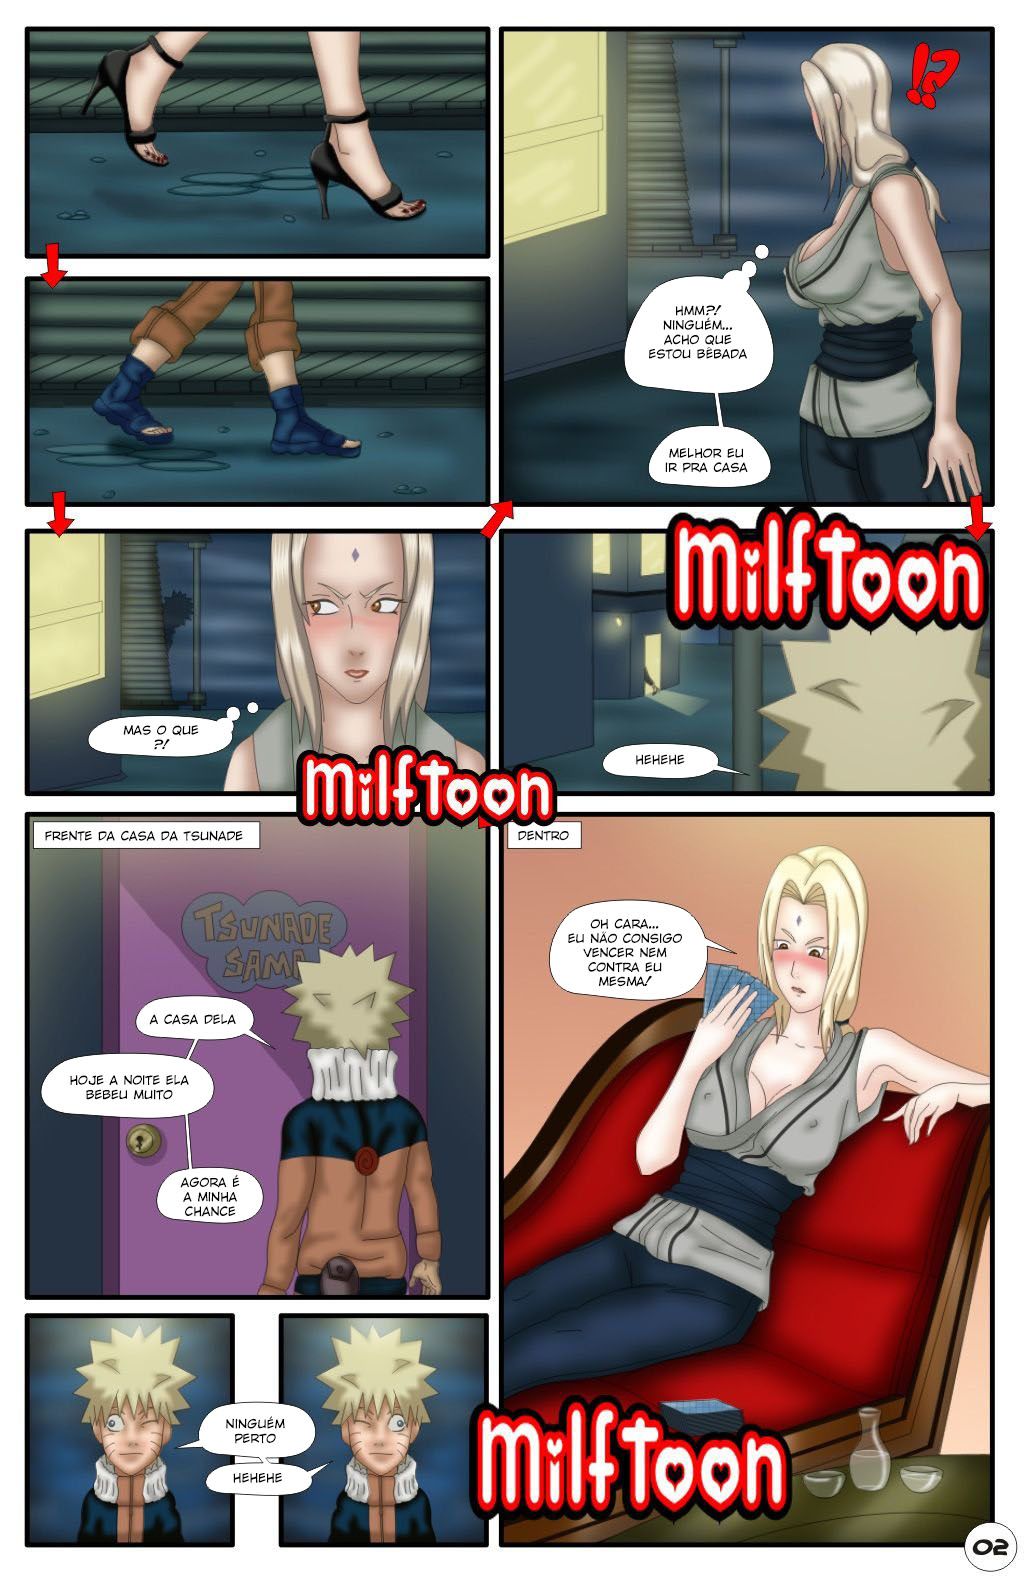 Naruto by Milftoon Hentai pt-br 02